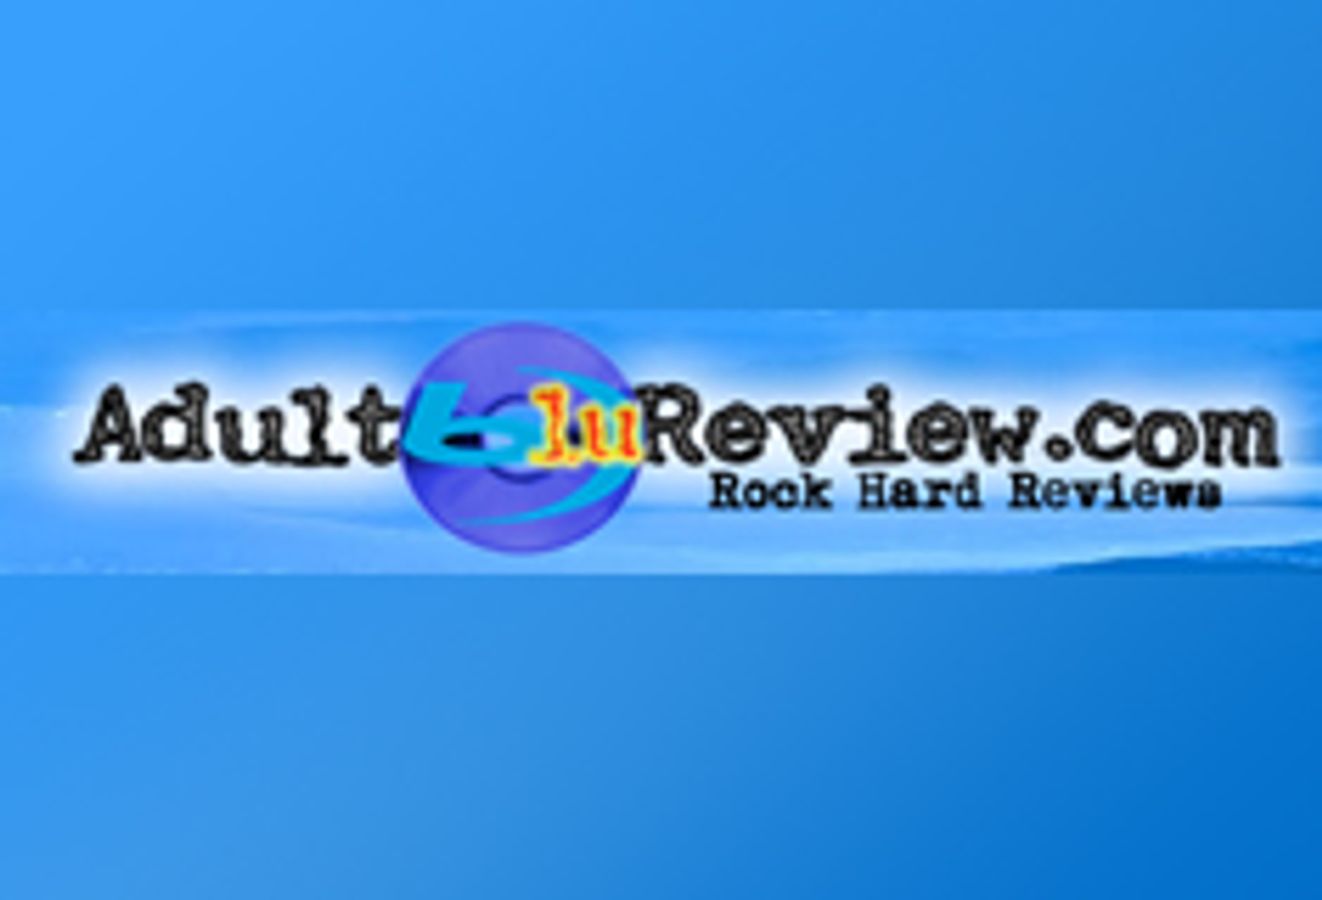 Adult Blu Review